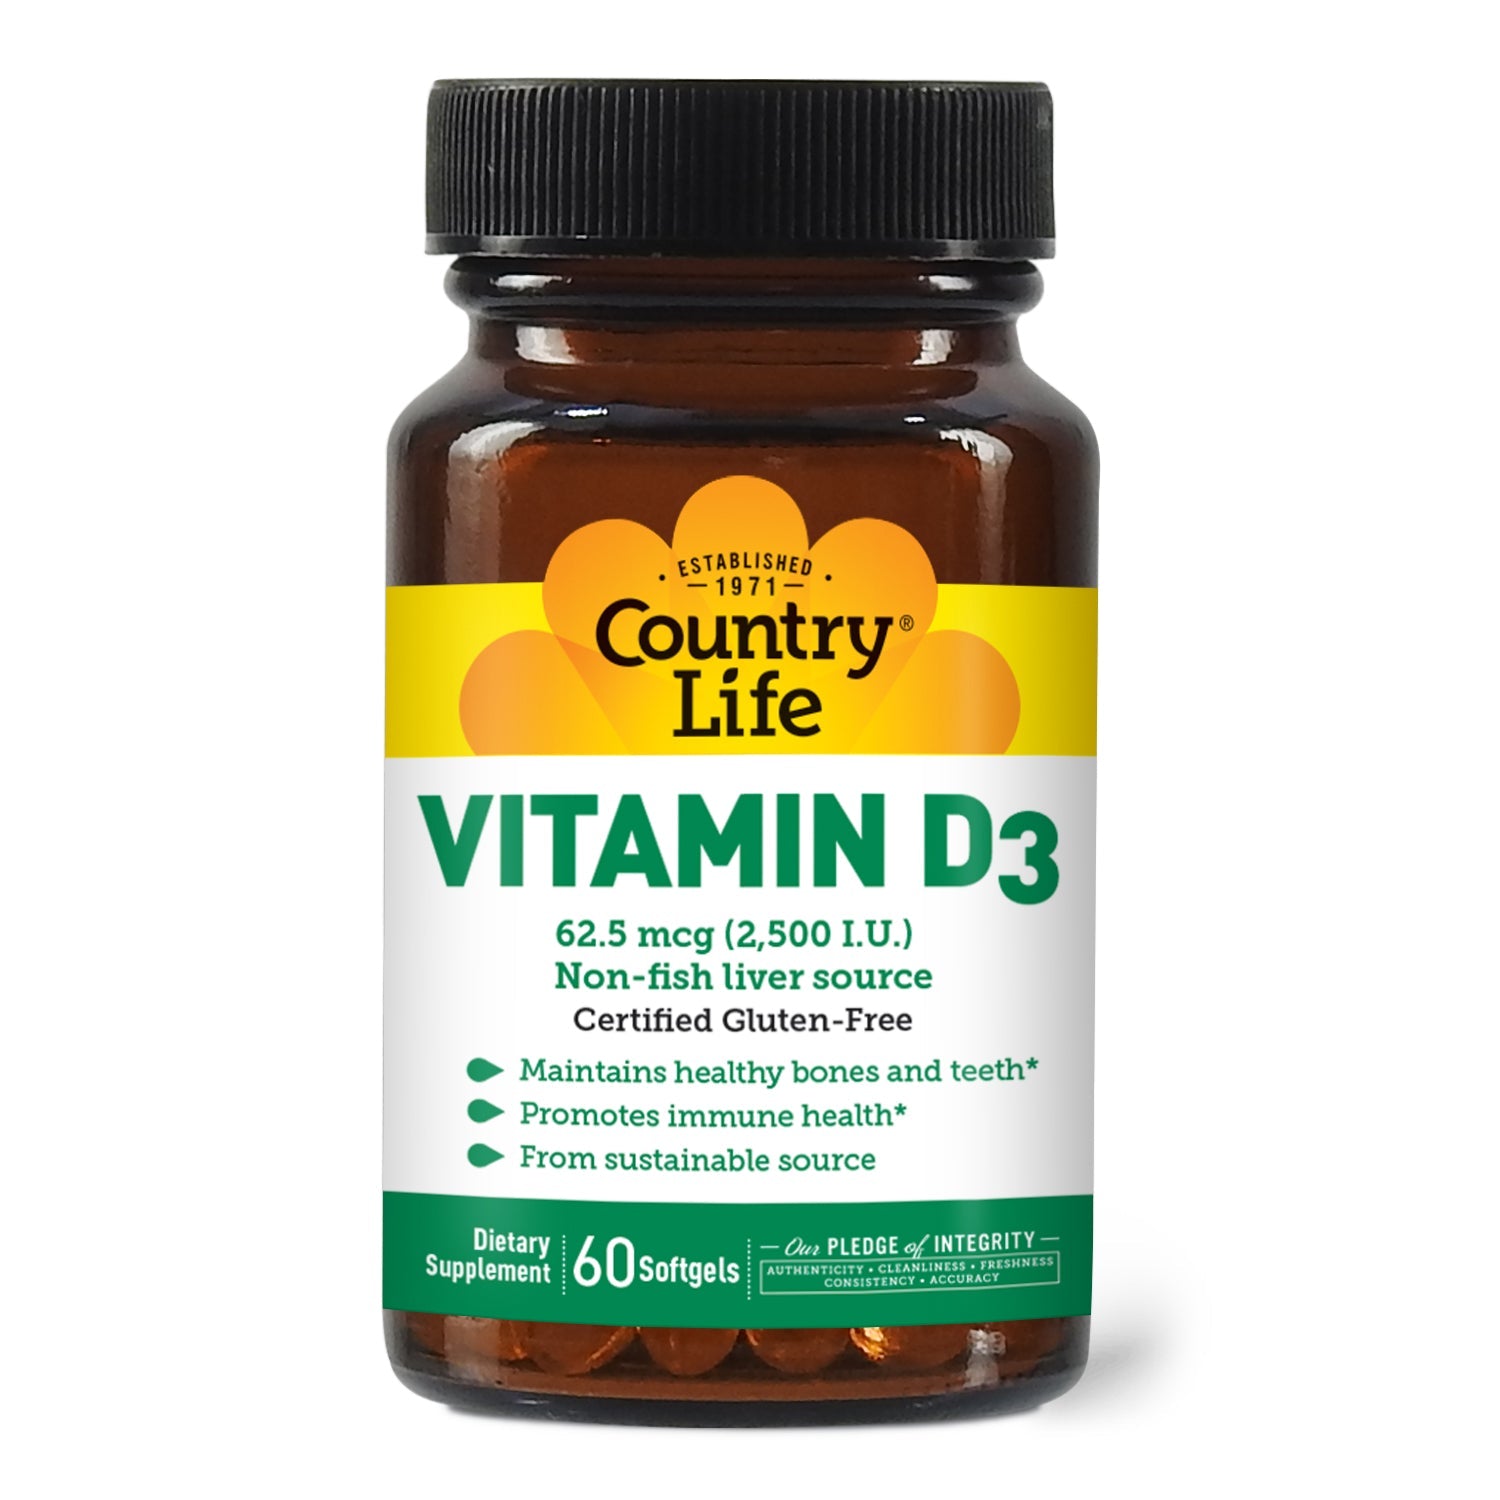 What is the Difference Between Vitamin D and Vitamin D3?